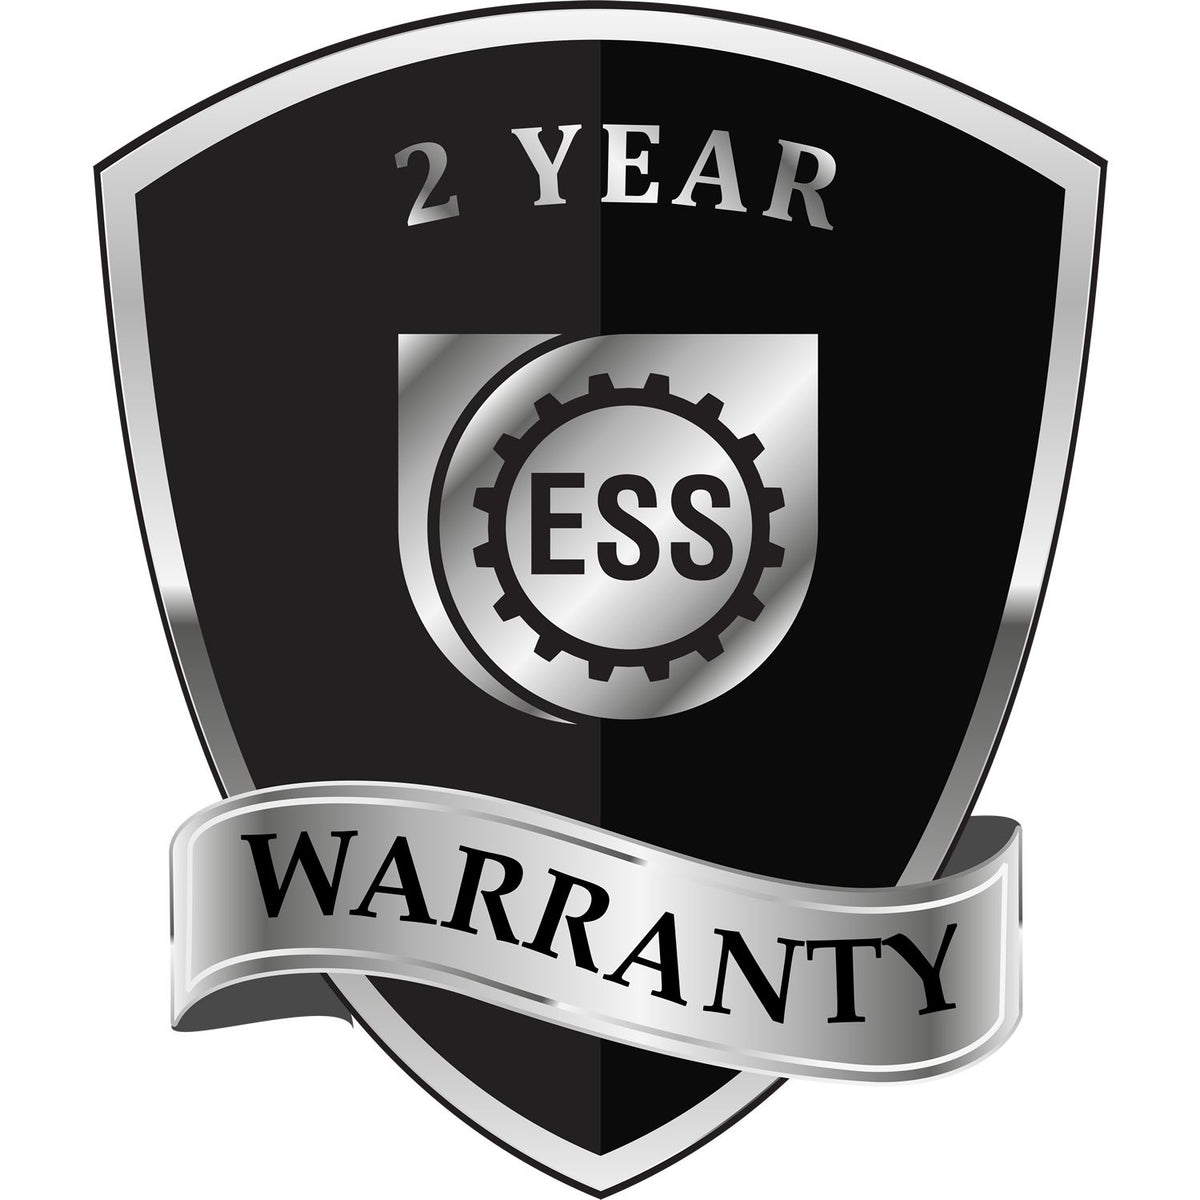 A badge or emblem showing a warranty icon for the Heavy Duty Cast Iron Mississippi Architect Embosser